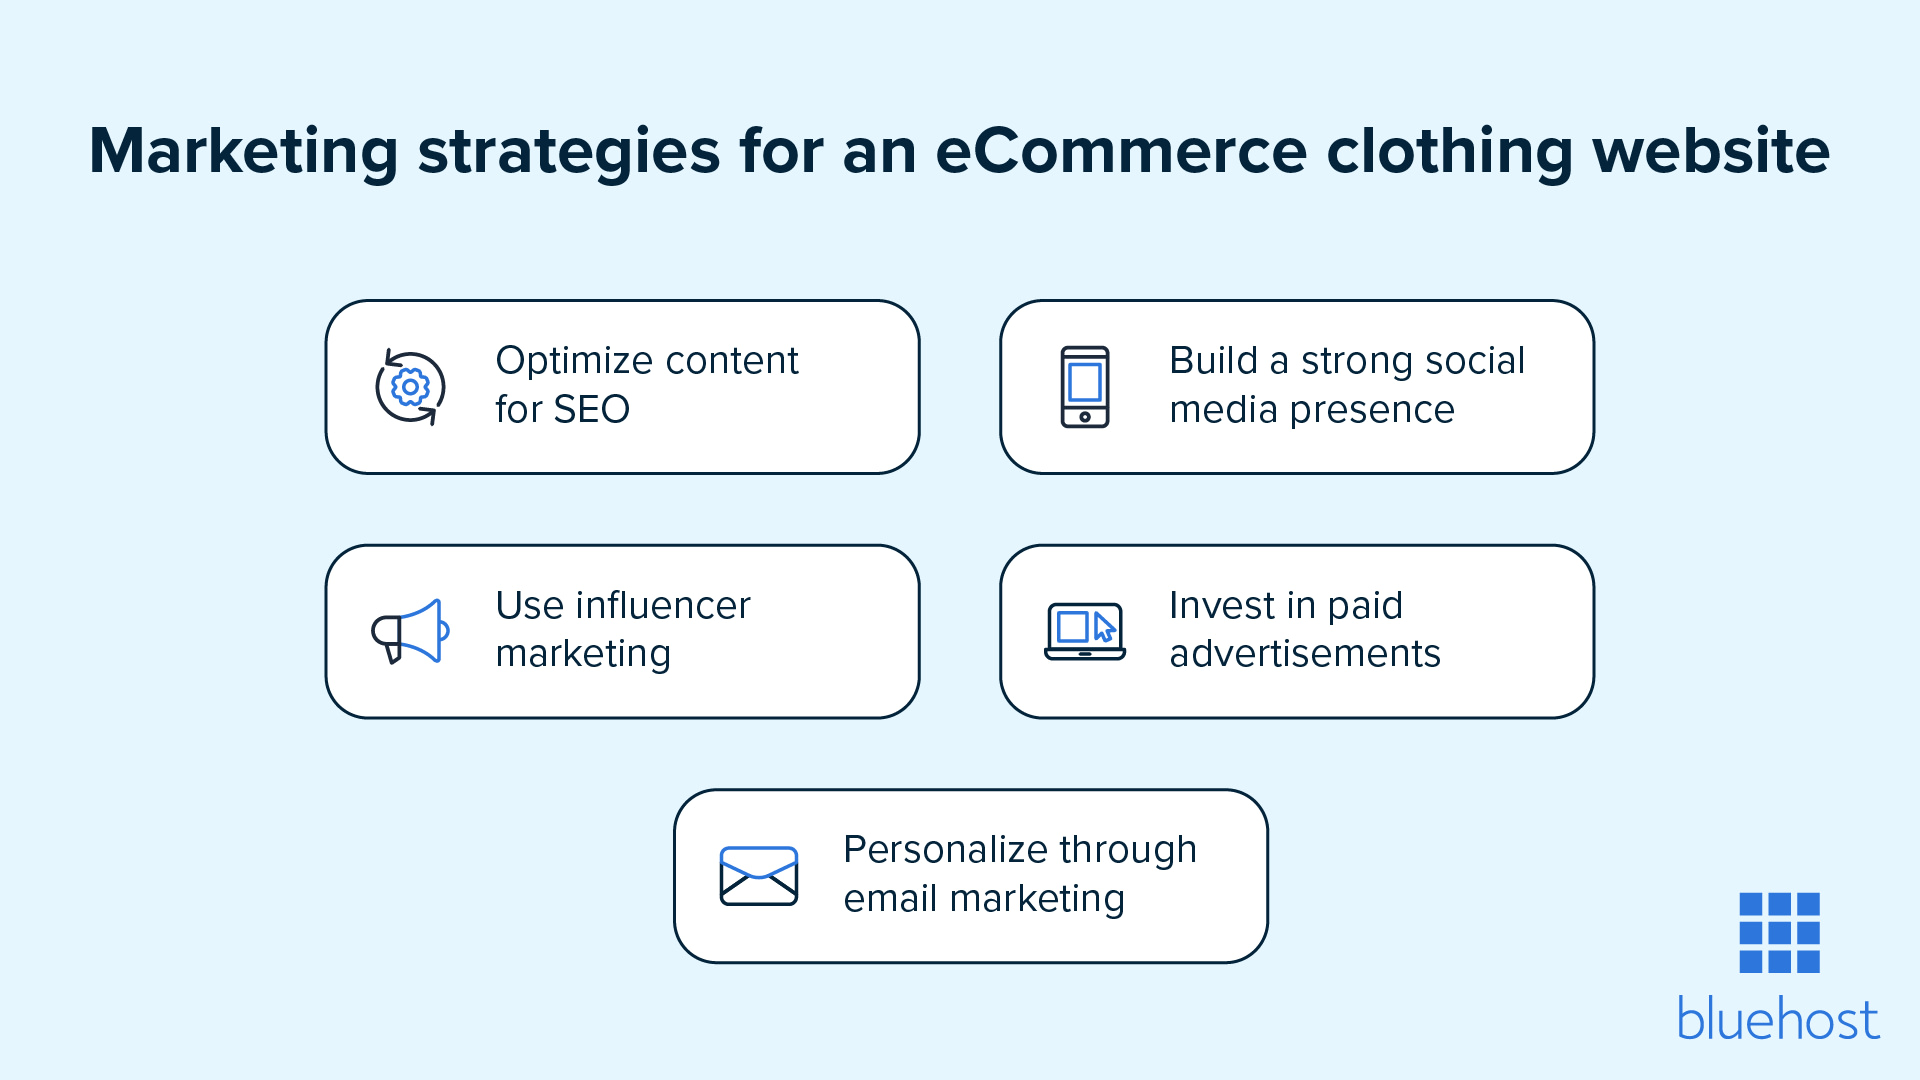 Different free and paid marketing strategies for an eCommerce clothing website.